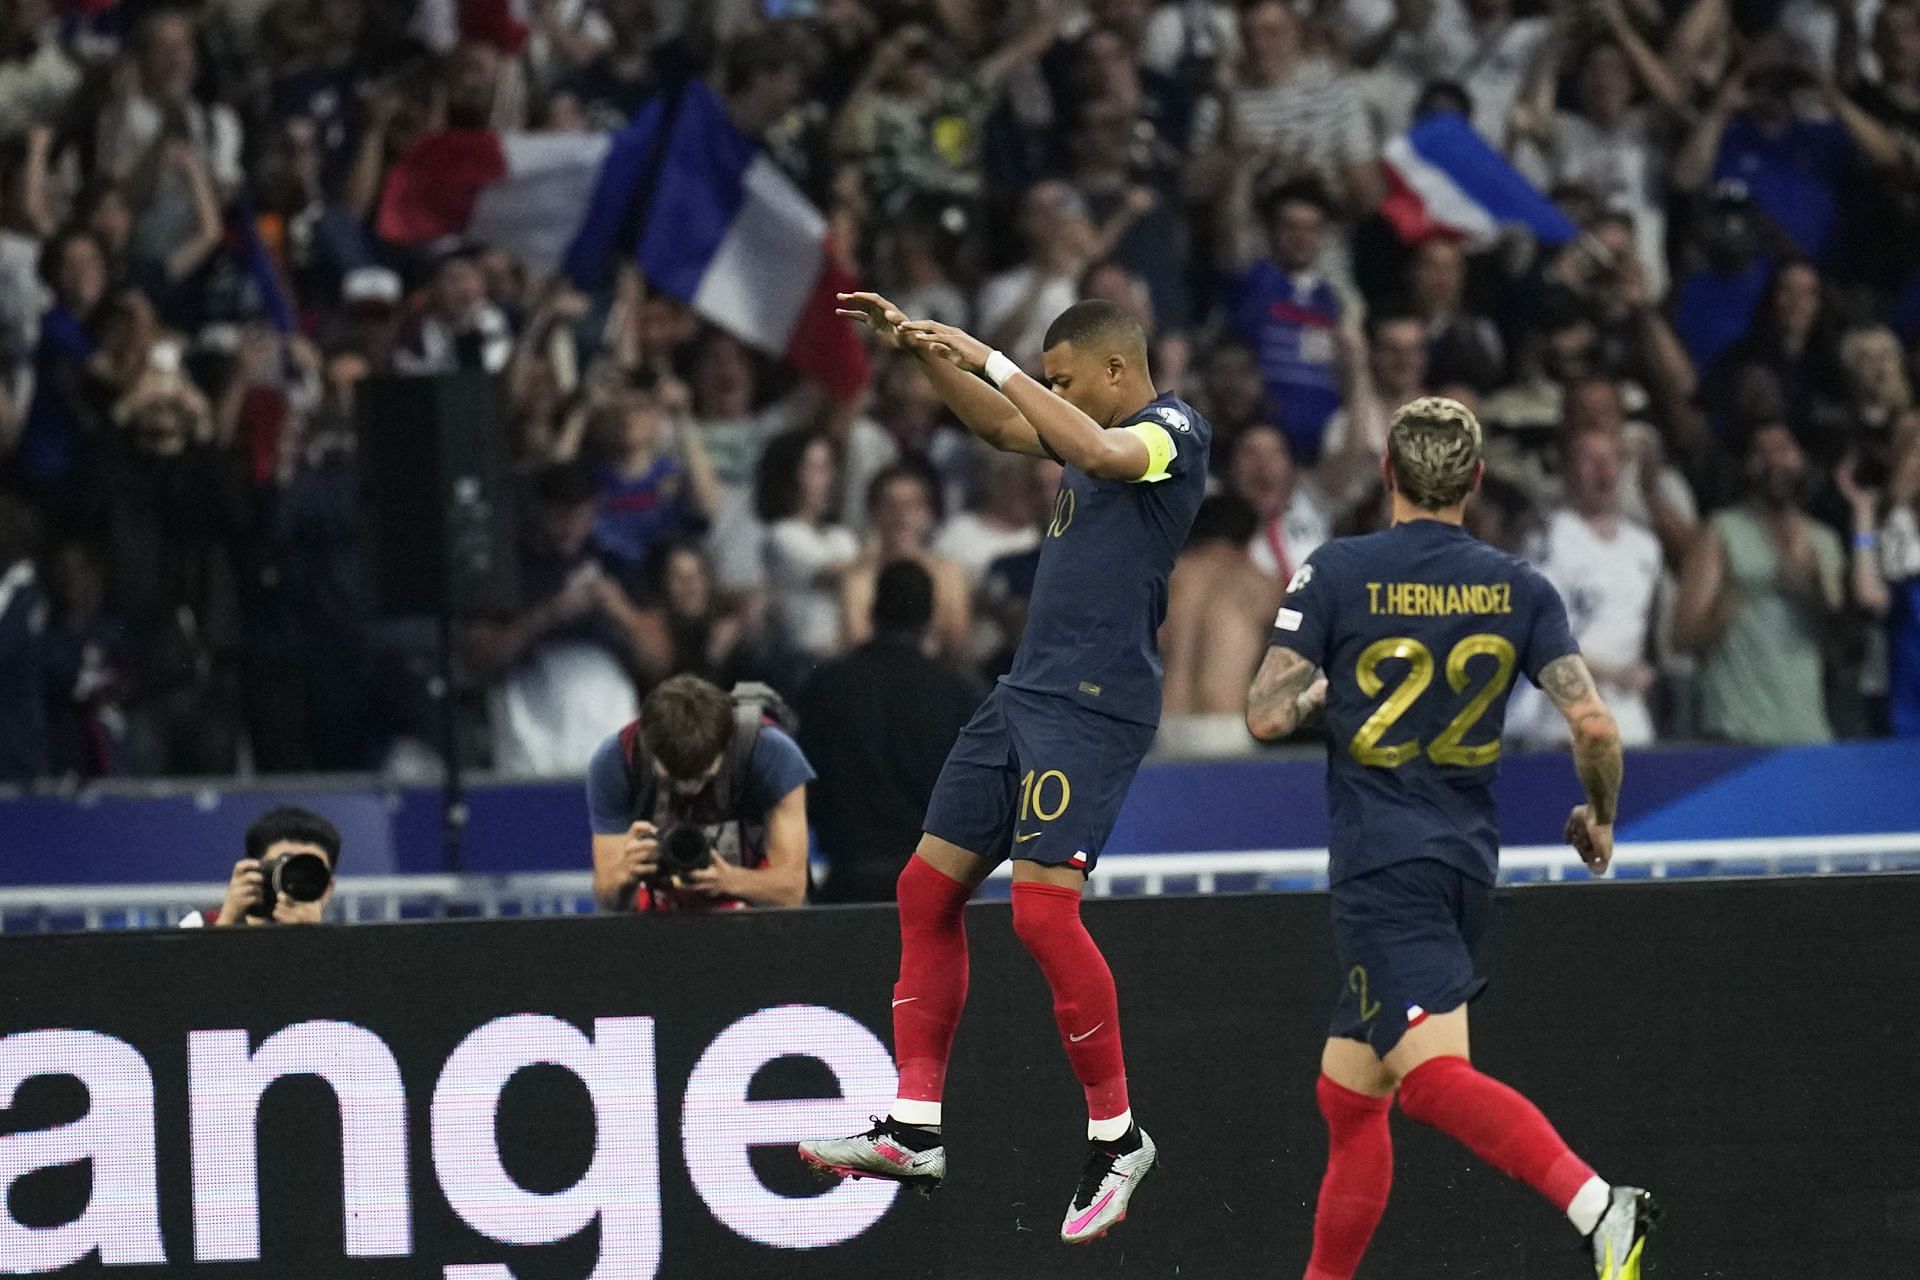 Kylian Mbappe, who is renowned for his pace, celebrates after scoring for France.